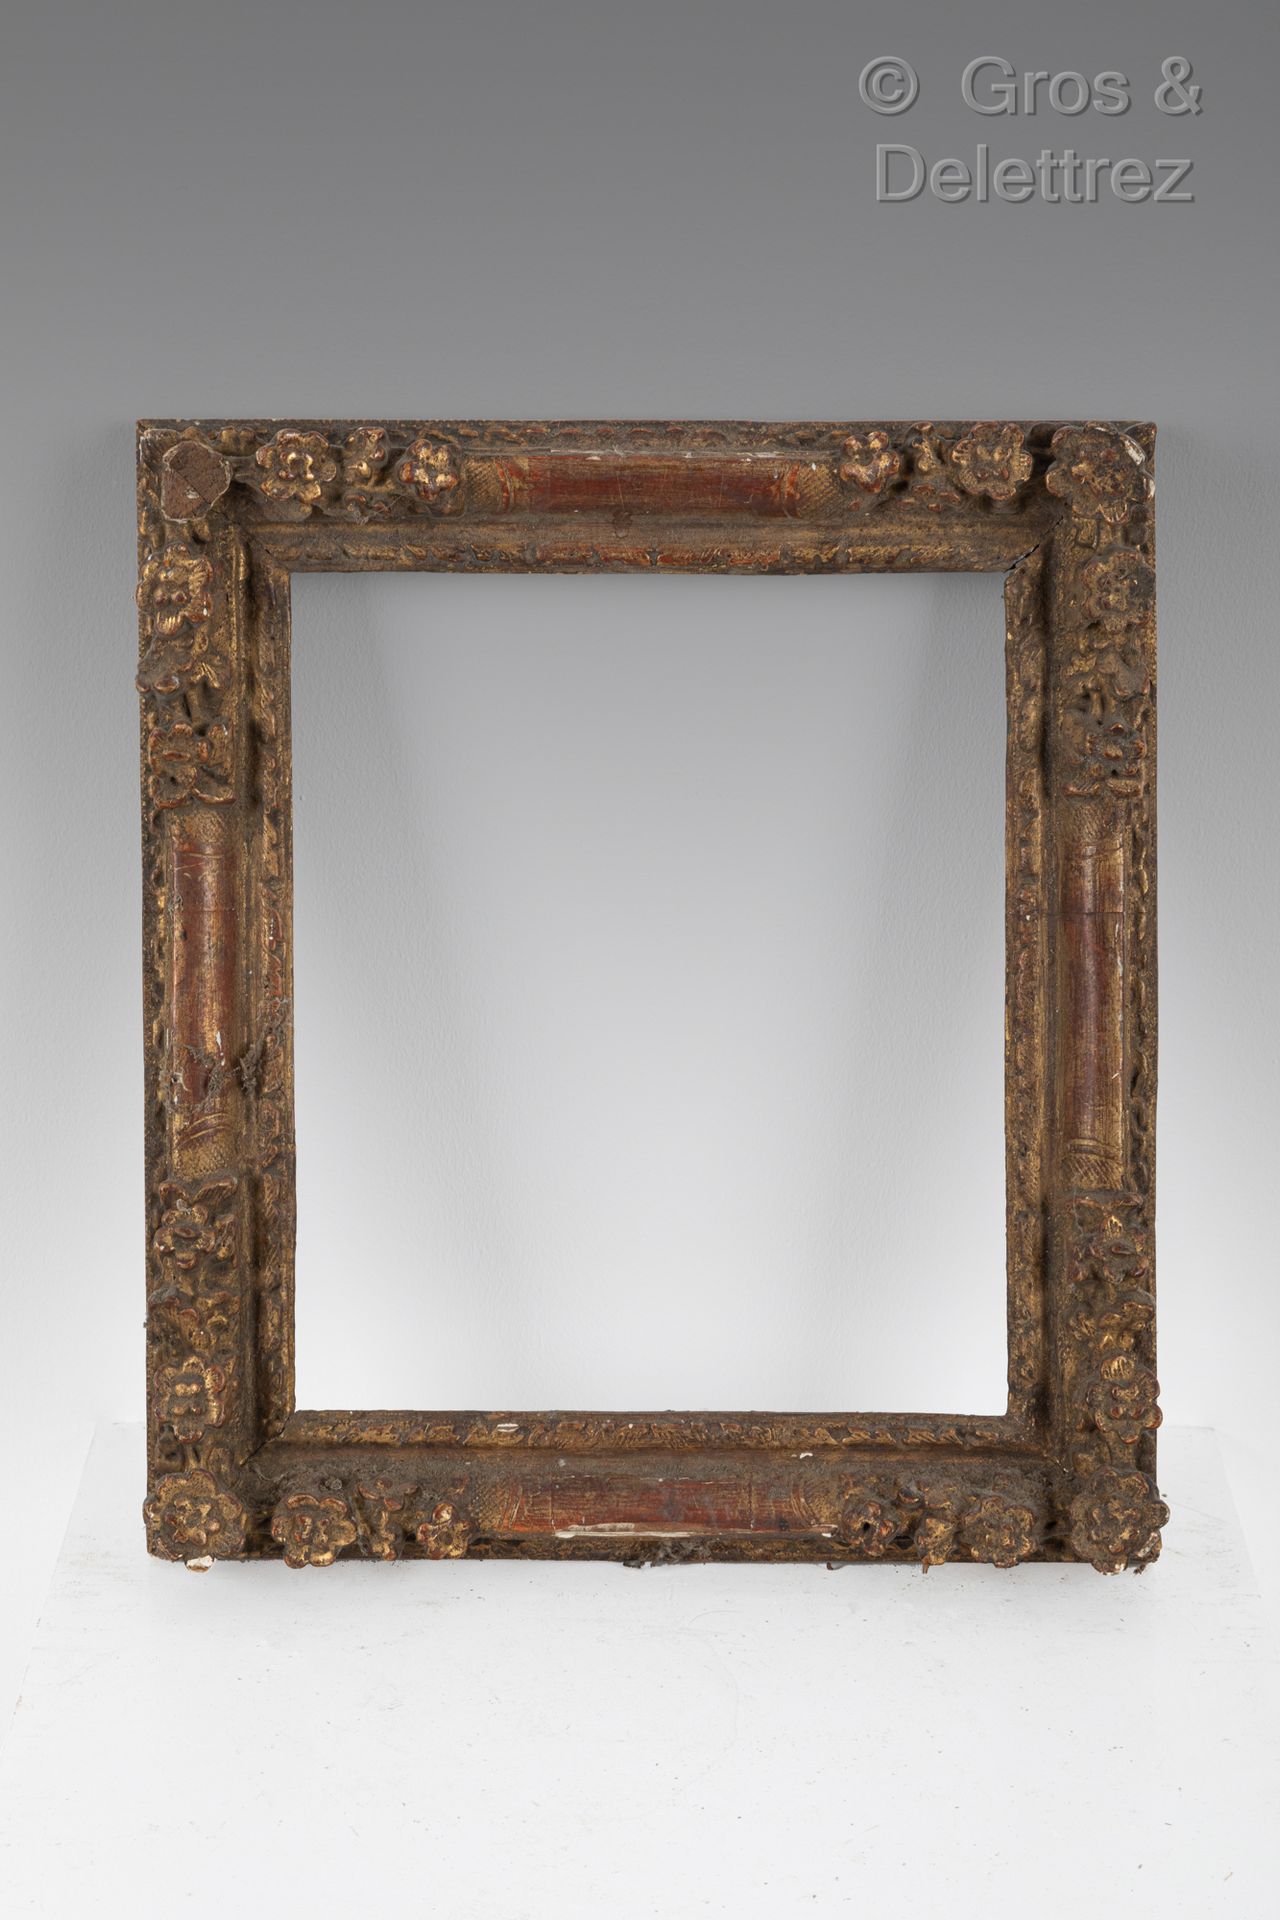 Null Carved and gilded oak frame decorated with flowers in the corners.

Louis X&hellip;